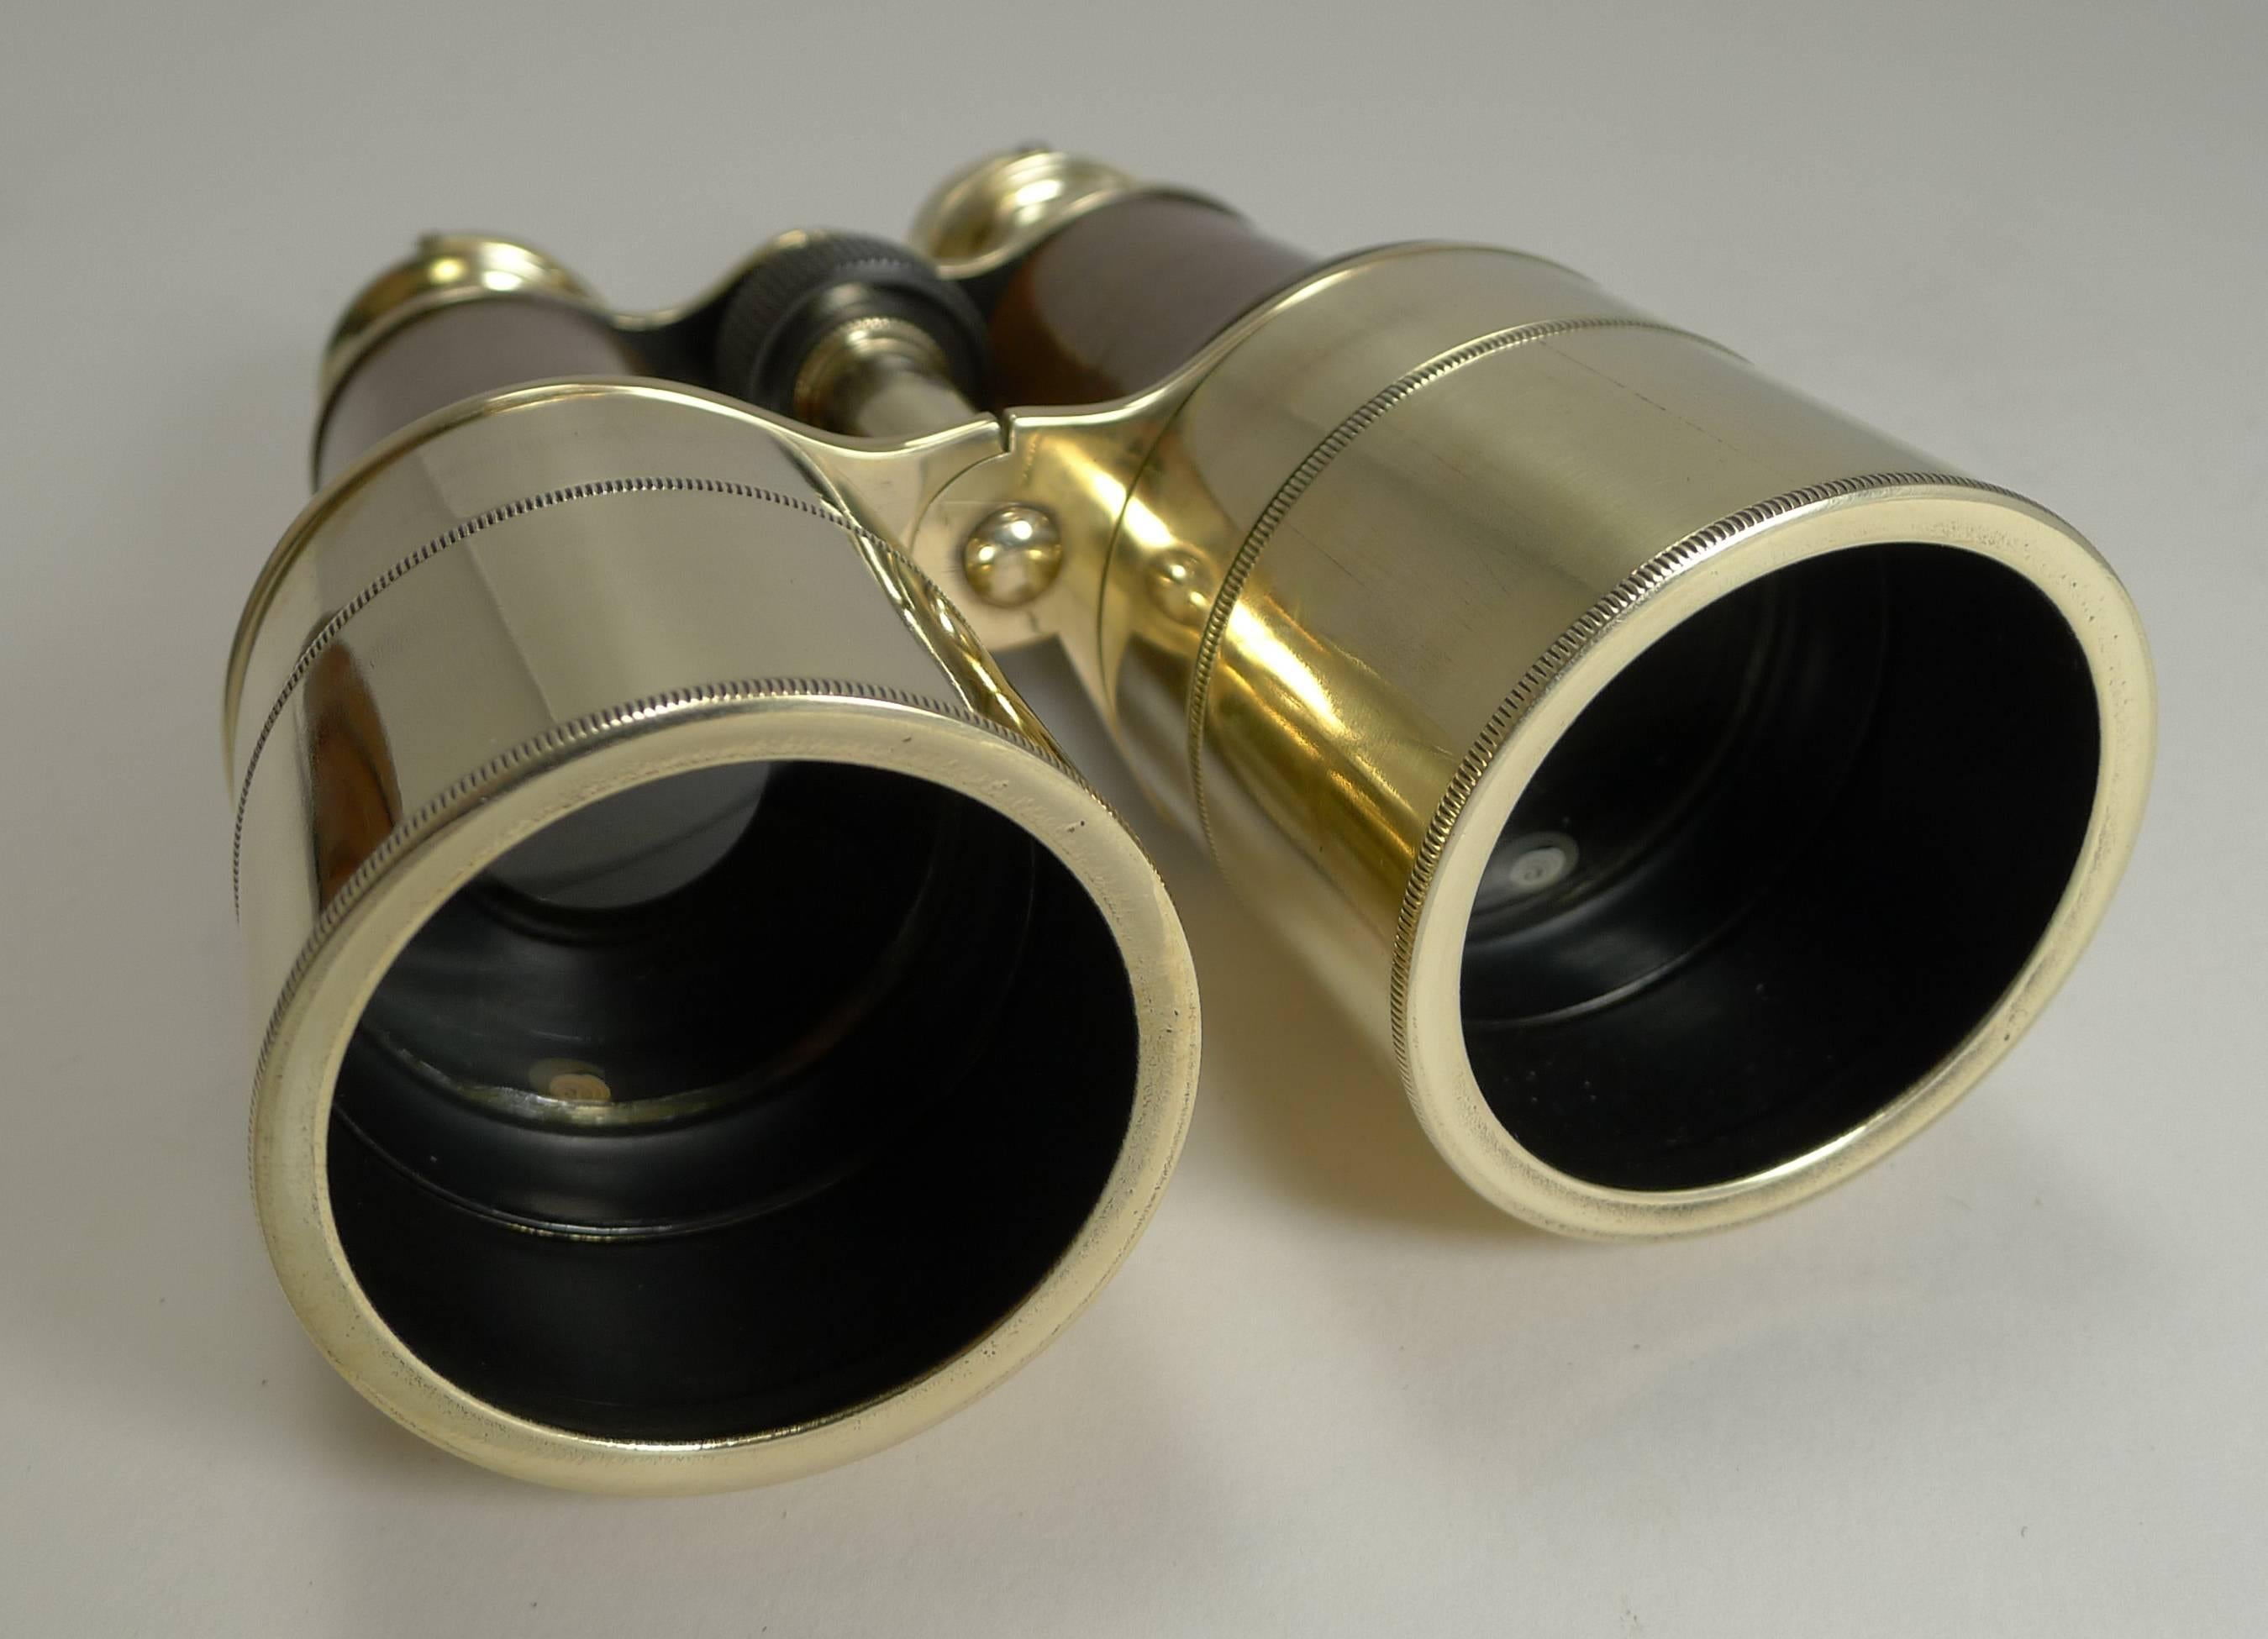 Pair of WWI Binoculars and Case, British Officer's Issue, 1918, Signed 3